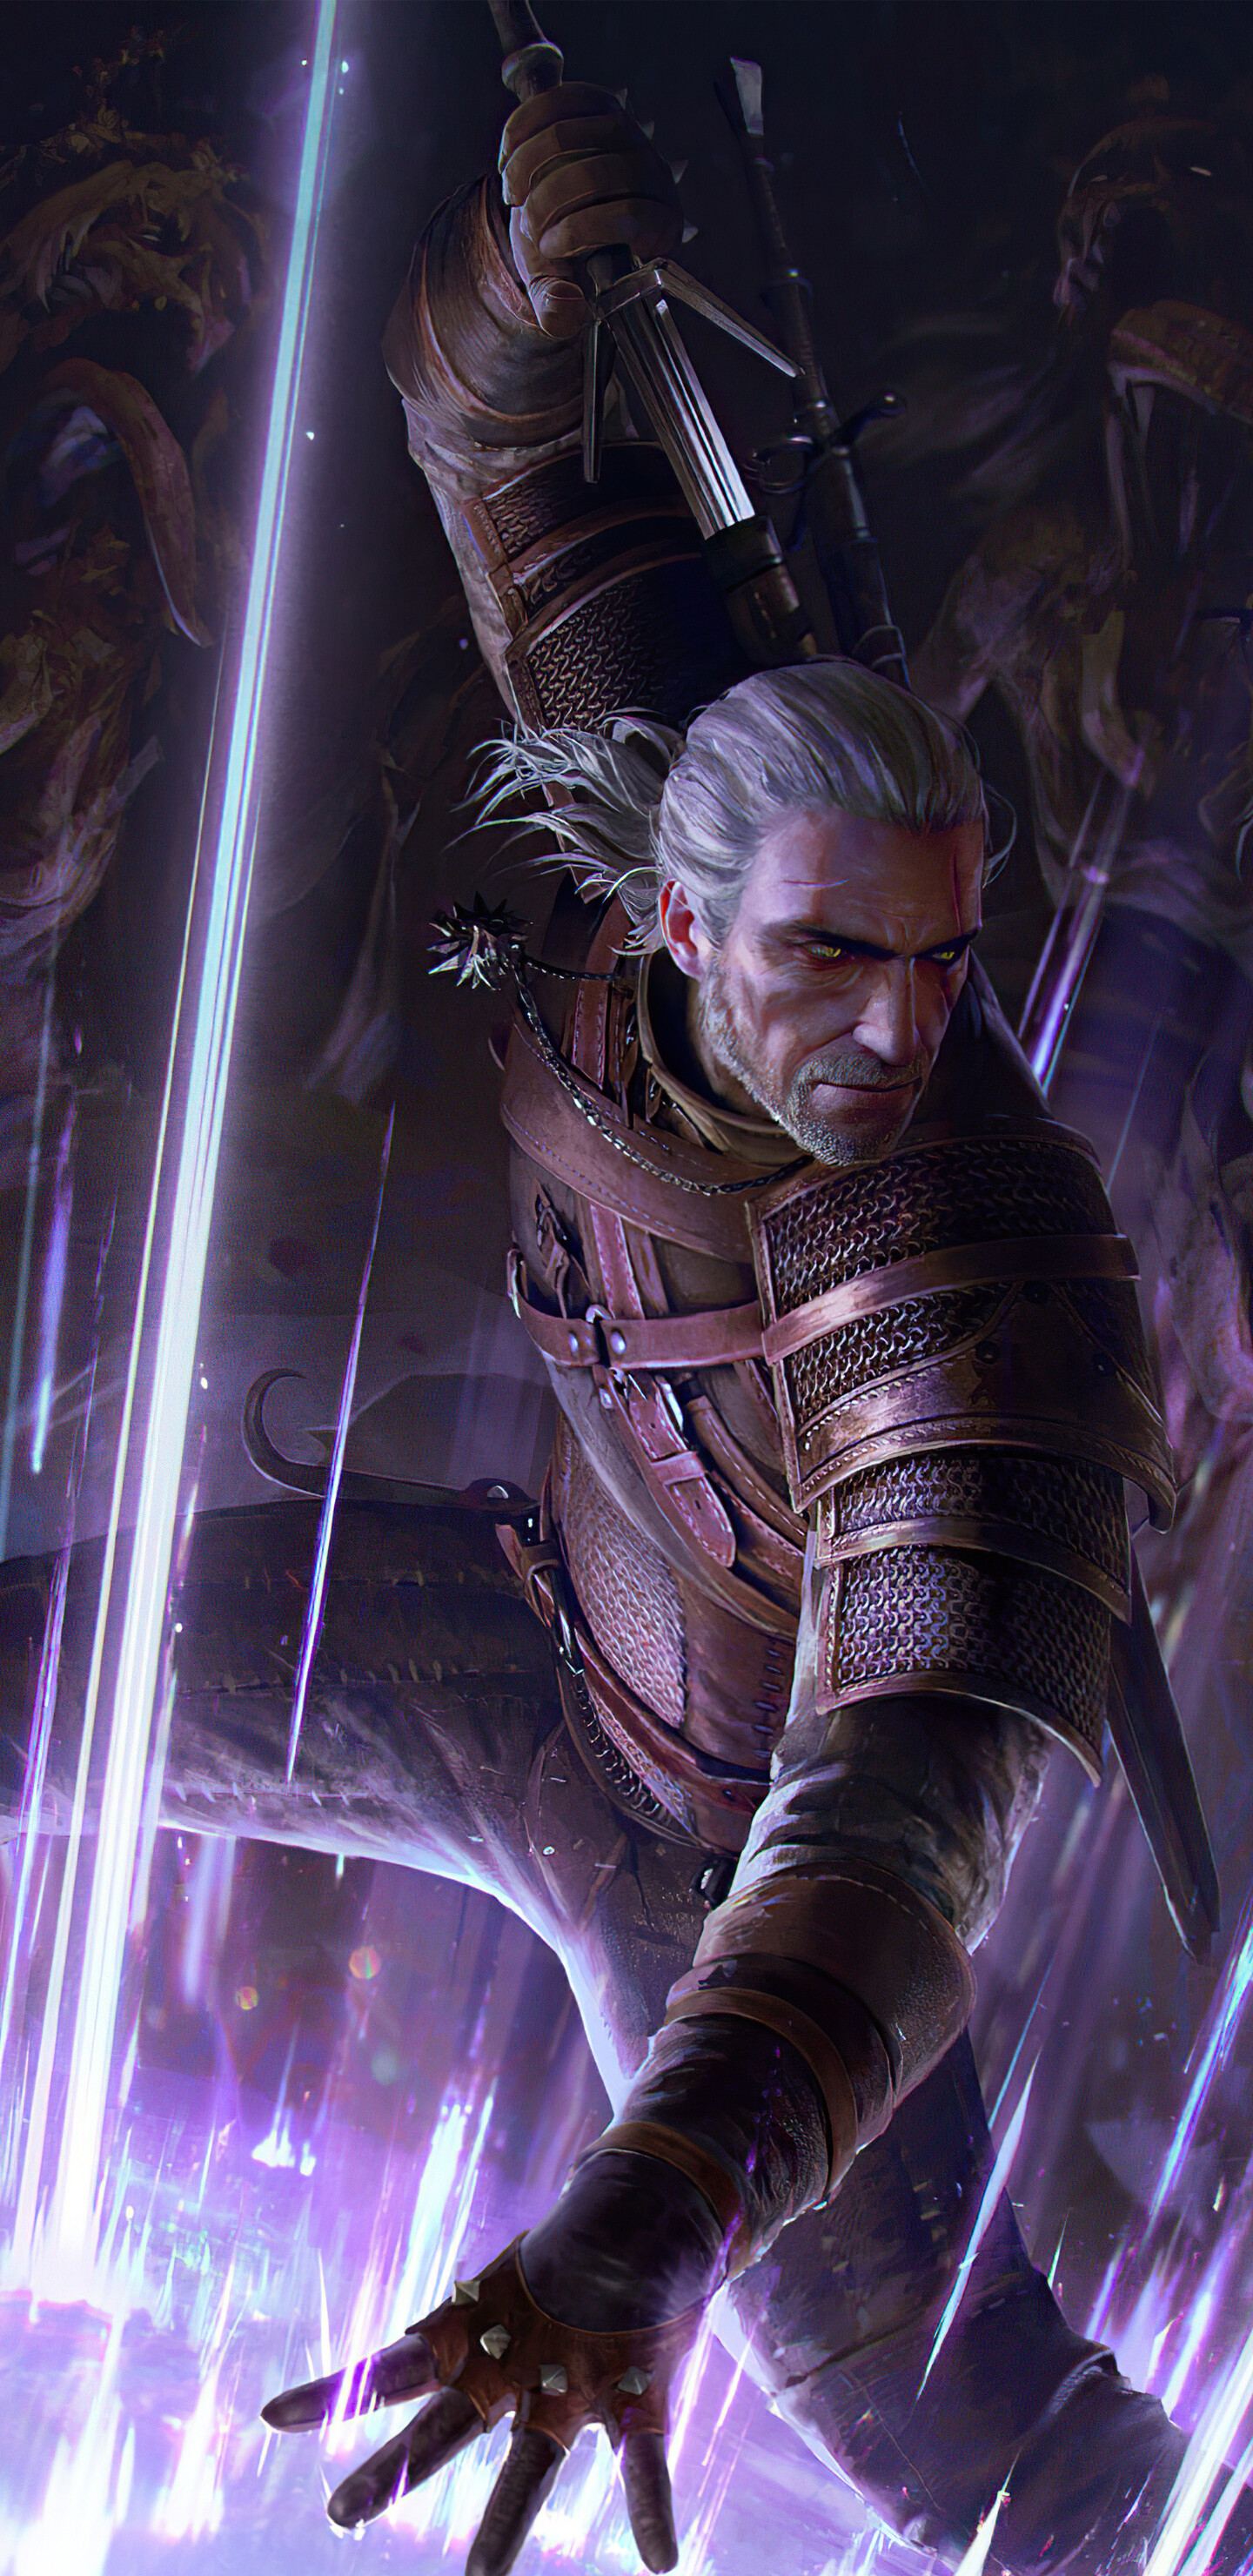 The Witcher (Game): Geralt of Rivia, GWENT: The Witcher Card Game. 1440x2960 HD Background.